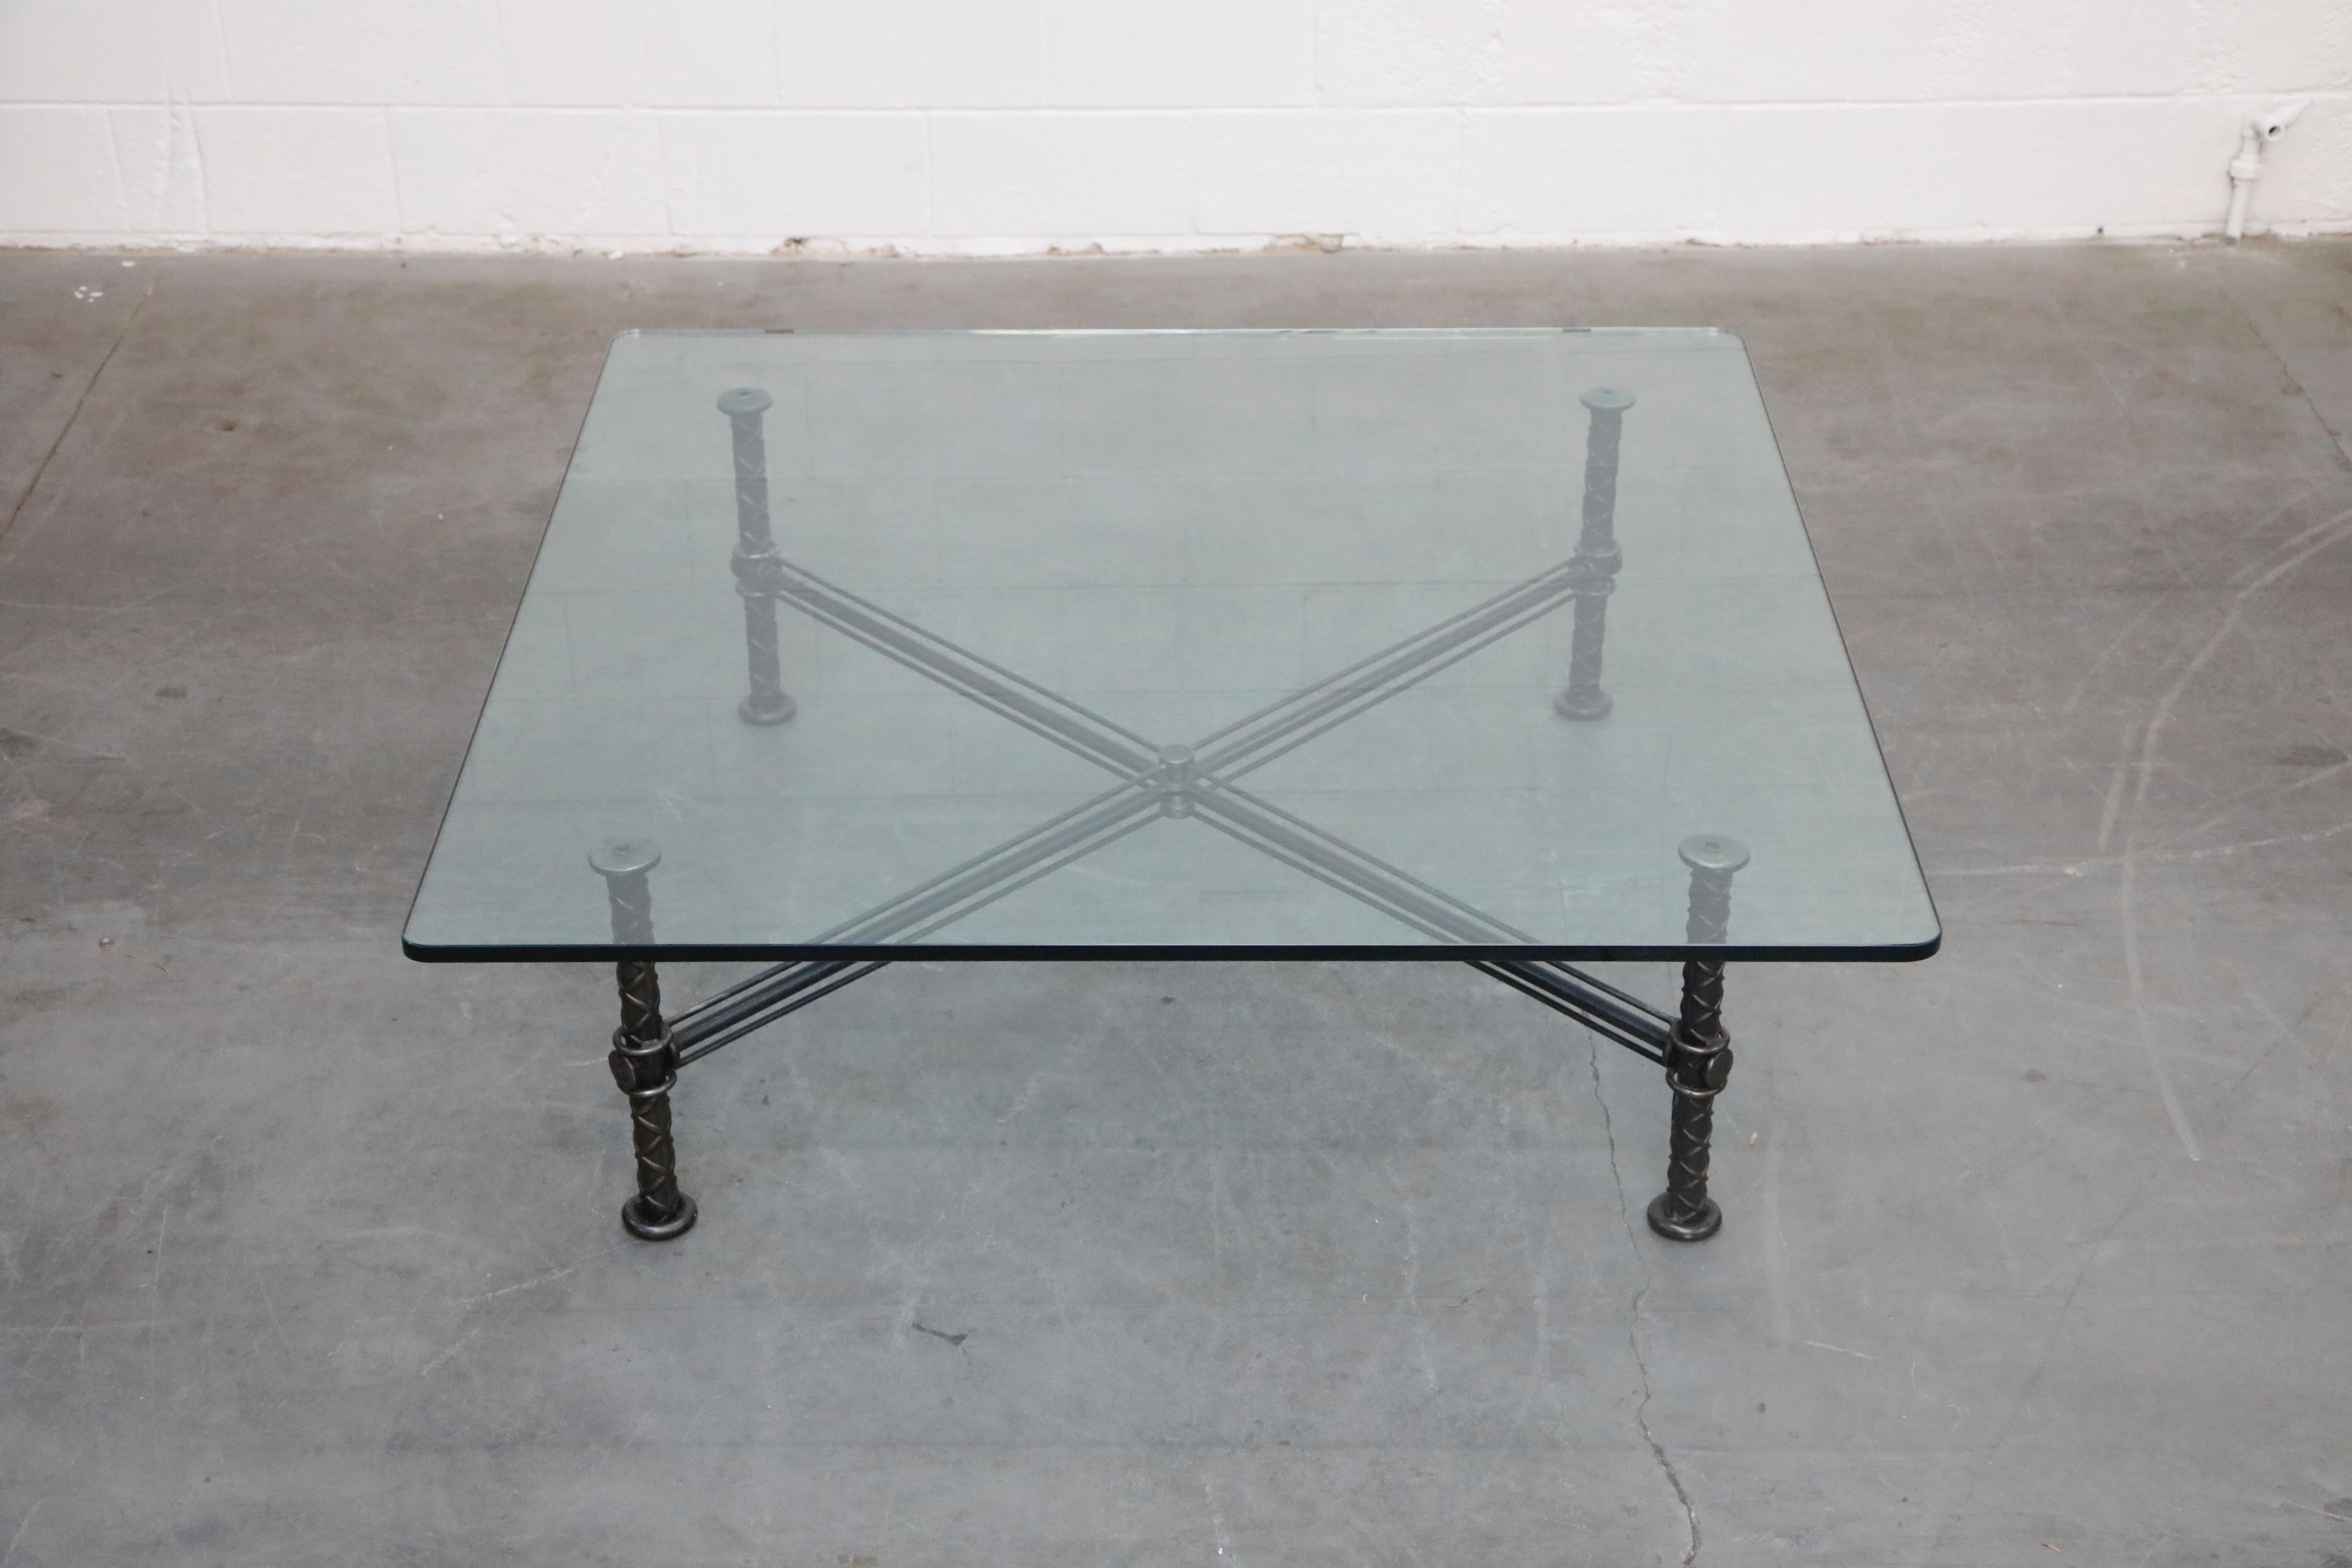 Sculpted Steel Coffee Table by Ilana Goor, Signed and Numbered Edition 4